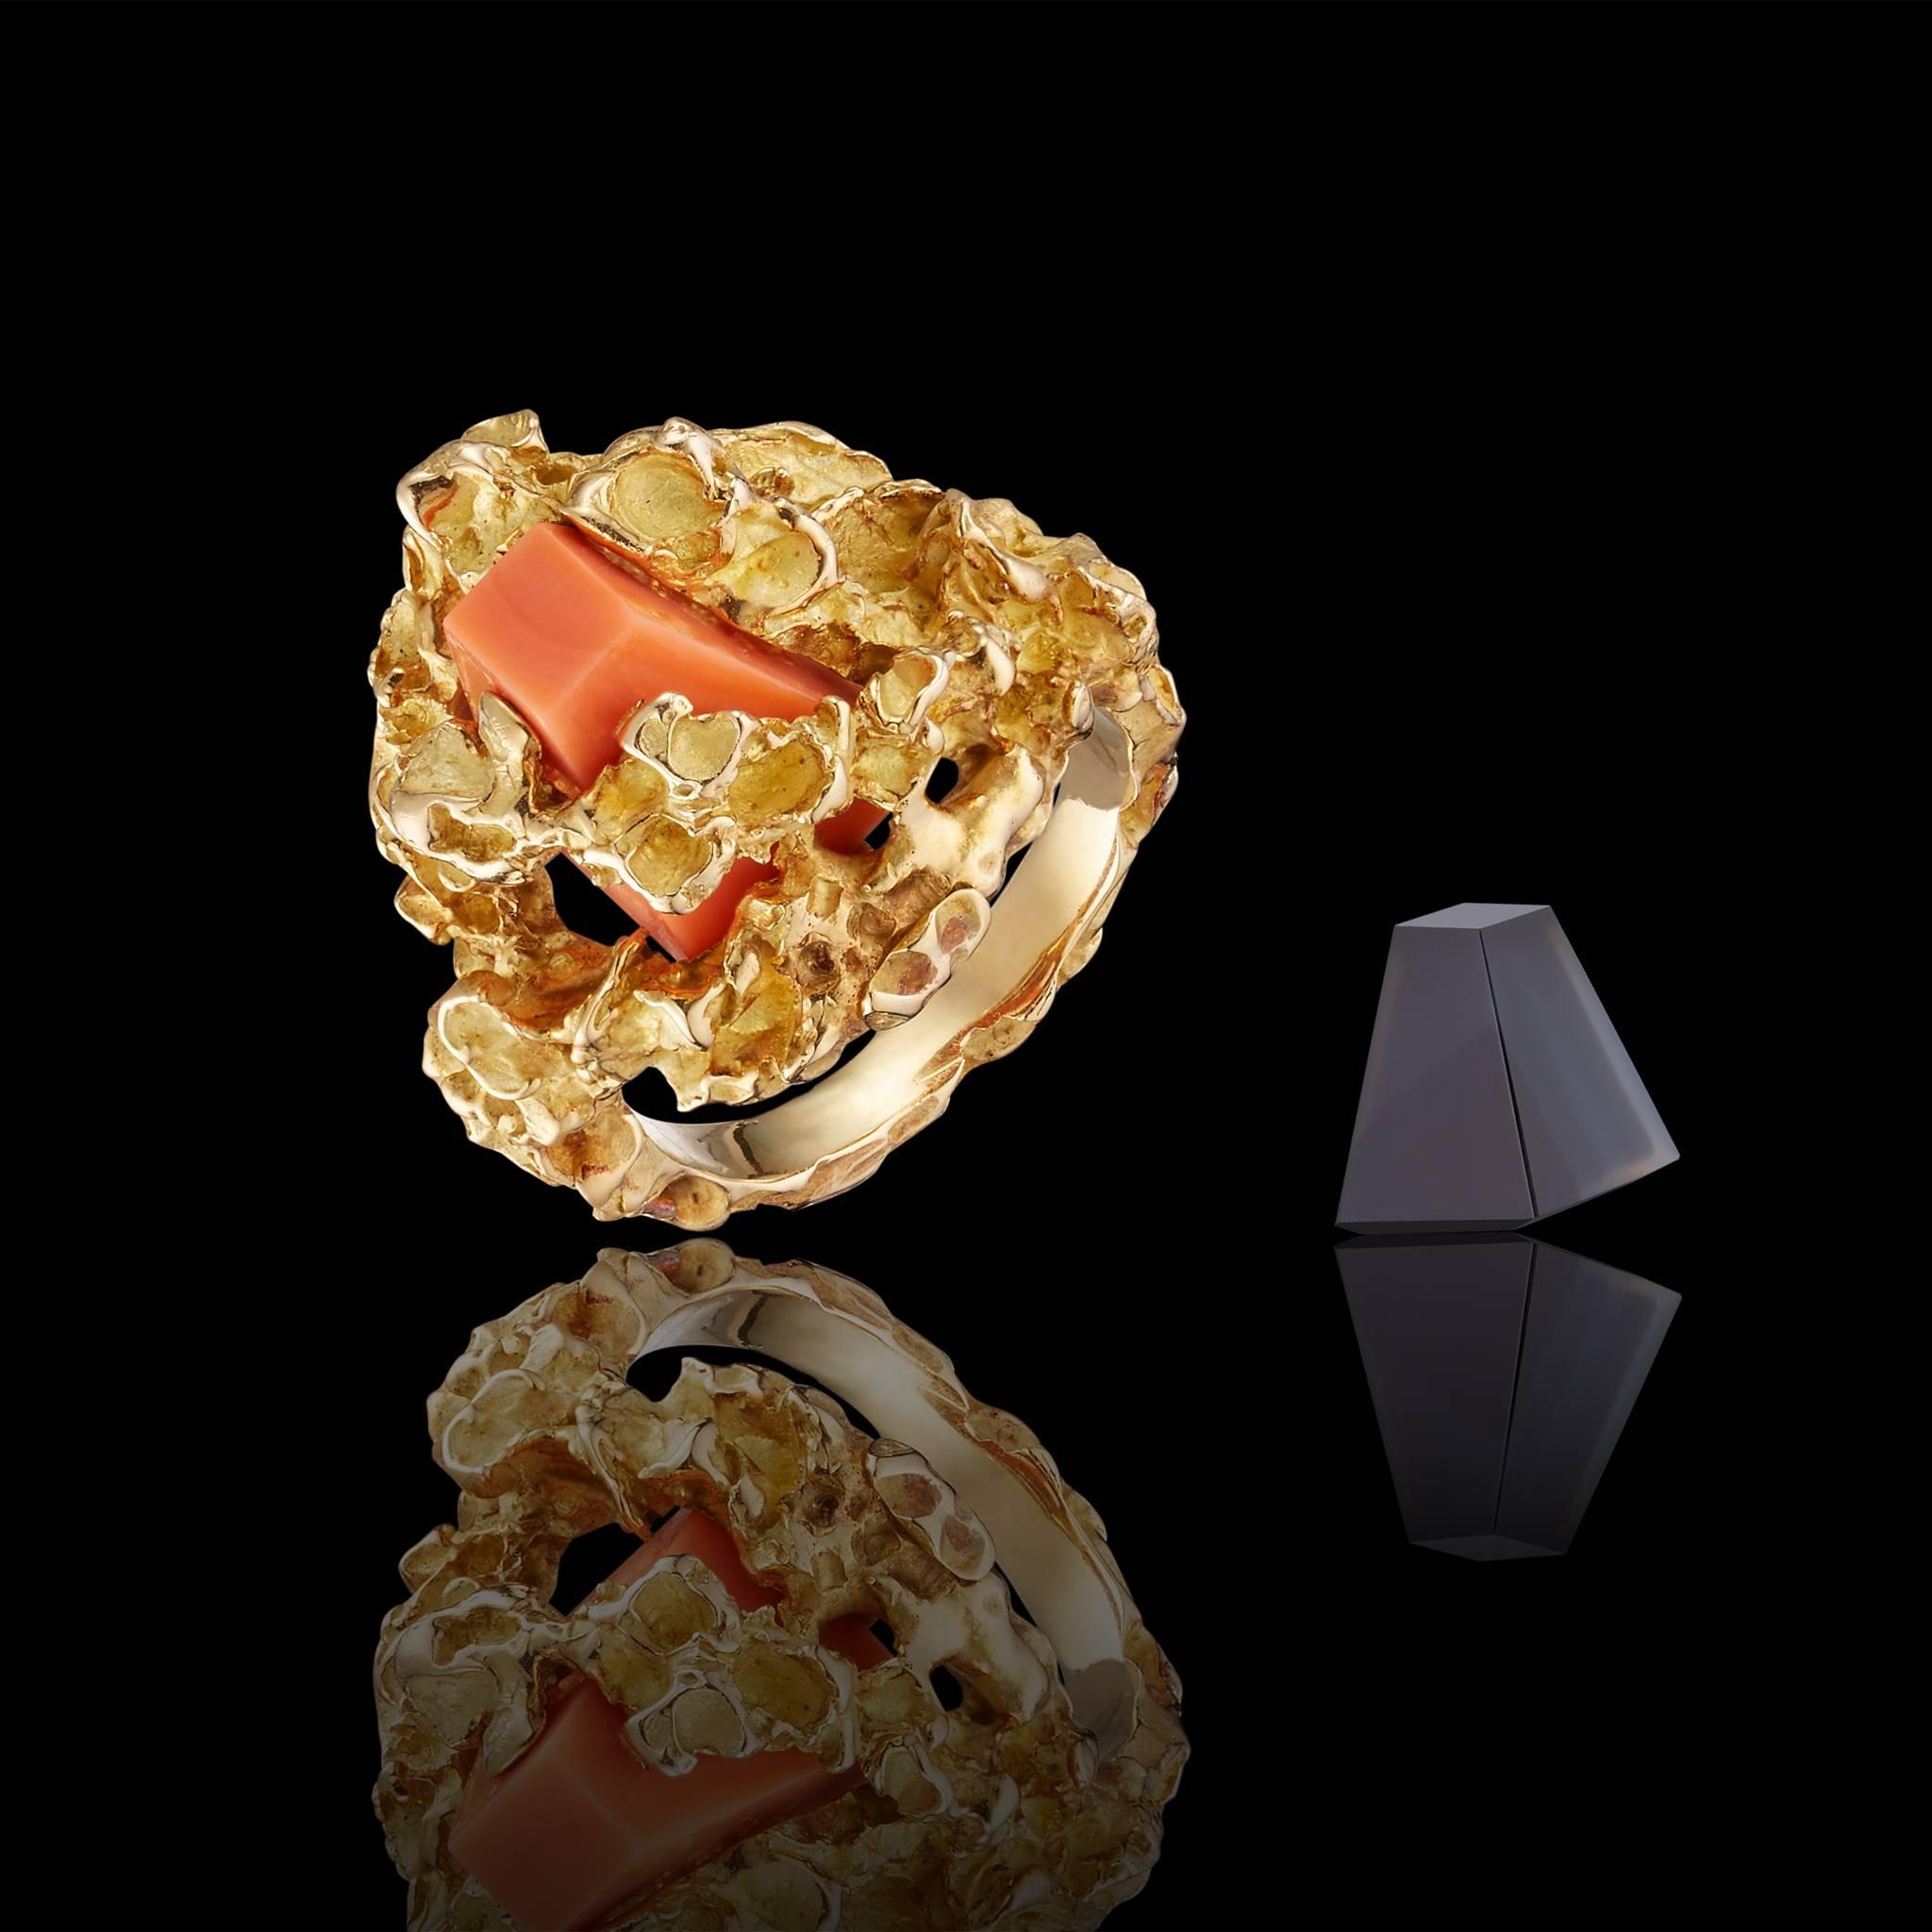 Chaumet's 1970s Ring in 18 carats'Gold with an interchangable baby skine coral and onyx pyramid .
-Coral baby skin pyramid.
-Onyx pyramid.
-Signature:CHAUMET PARIS.
-Ring Size:Metric:52/English:M/American 6 1/4/Japanese :12